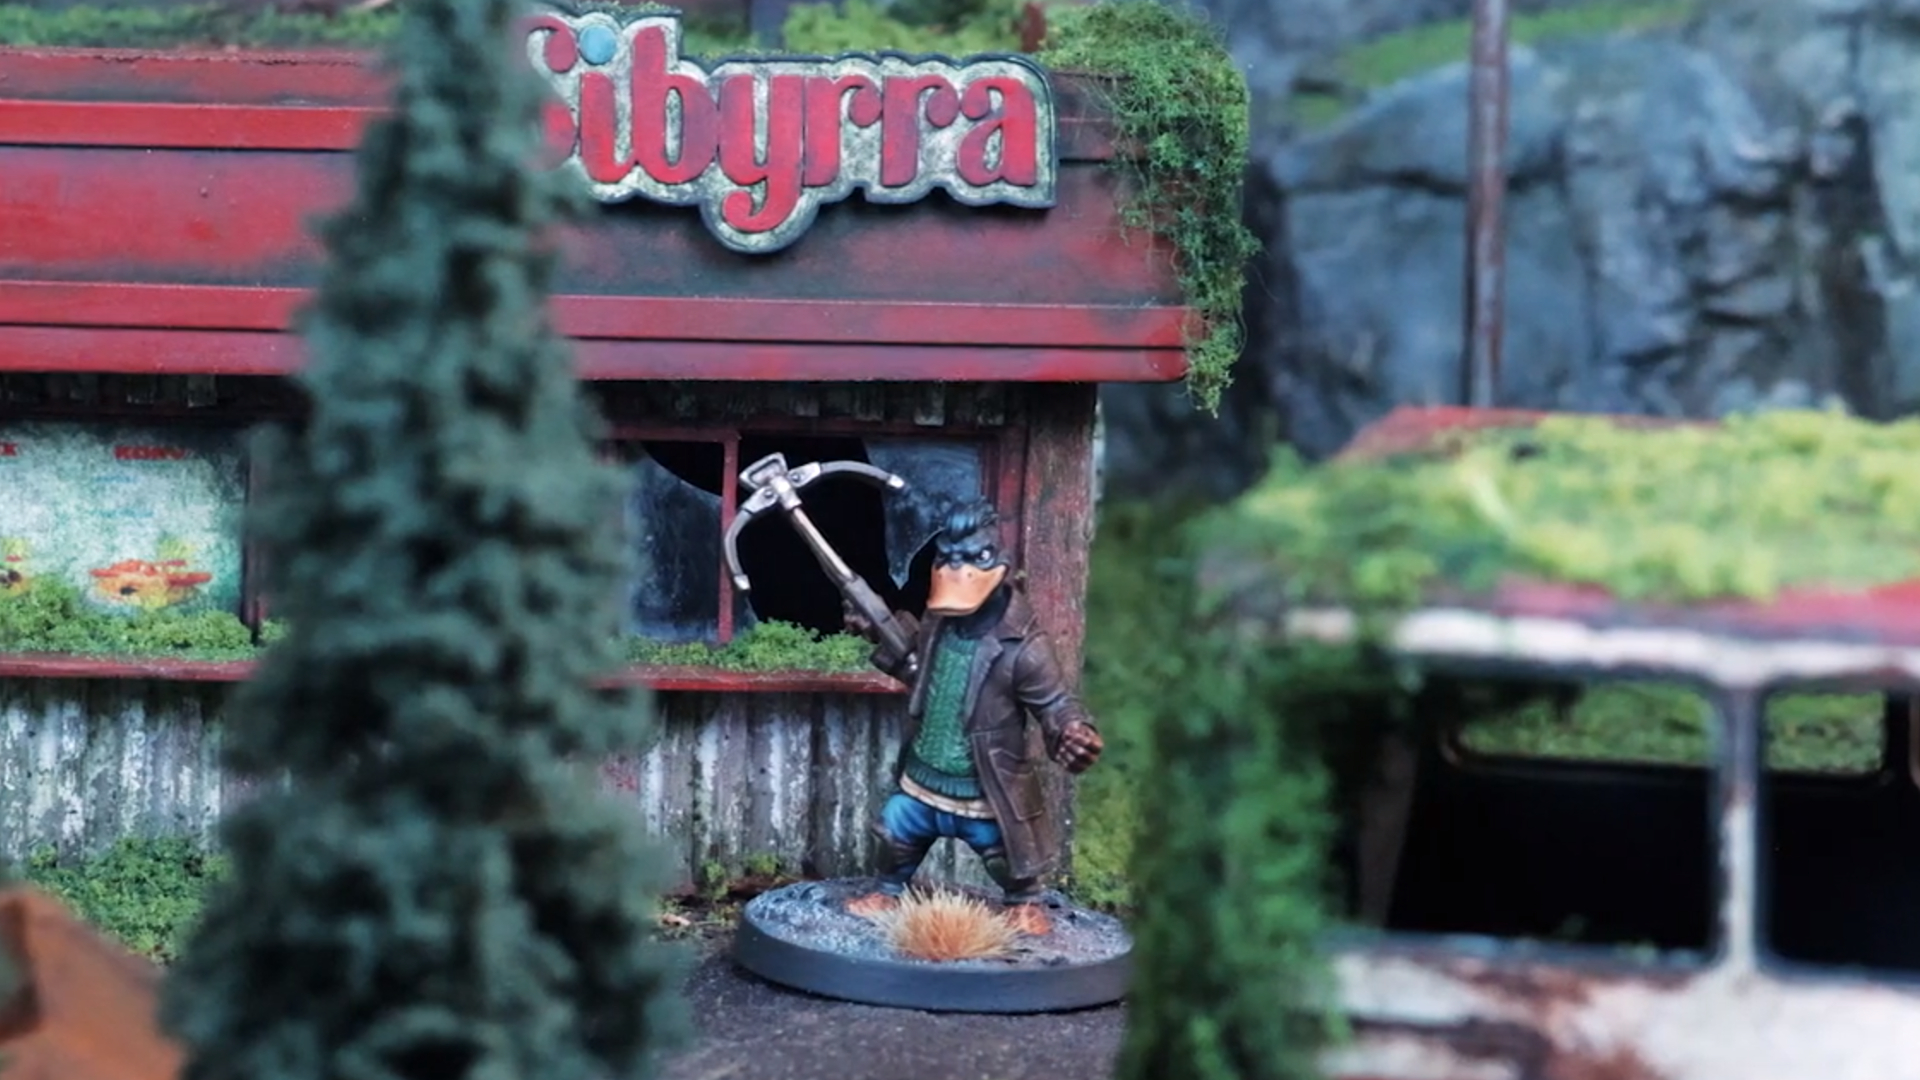 A closeup shot of a Zone Wars miniature near a broken shop, partially obscured by trees